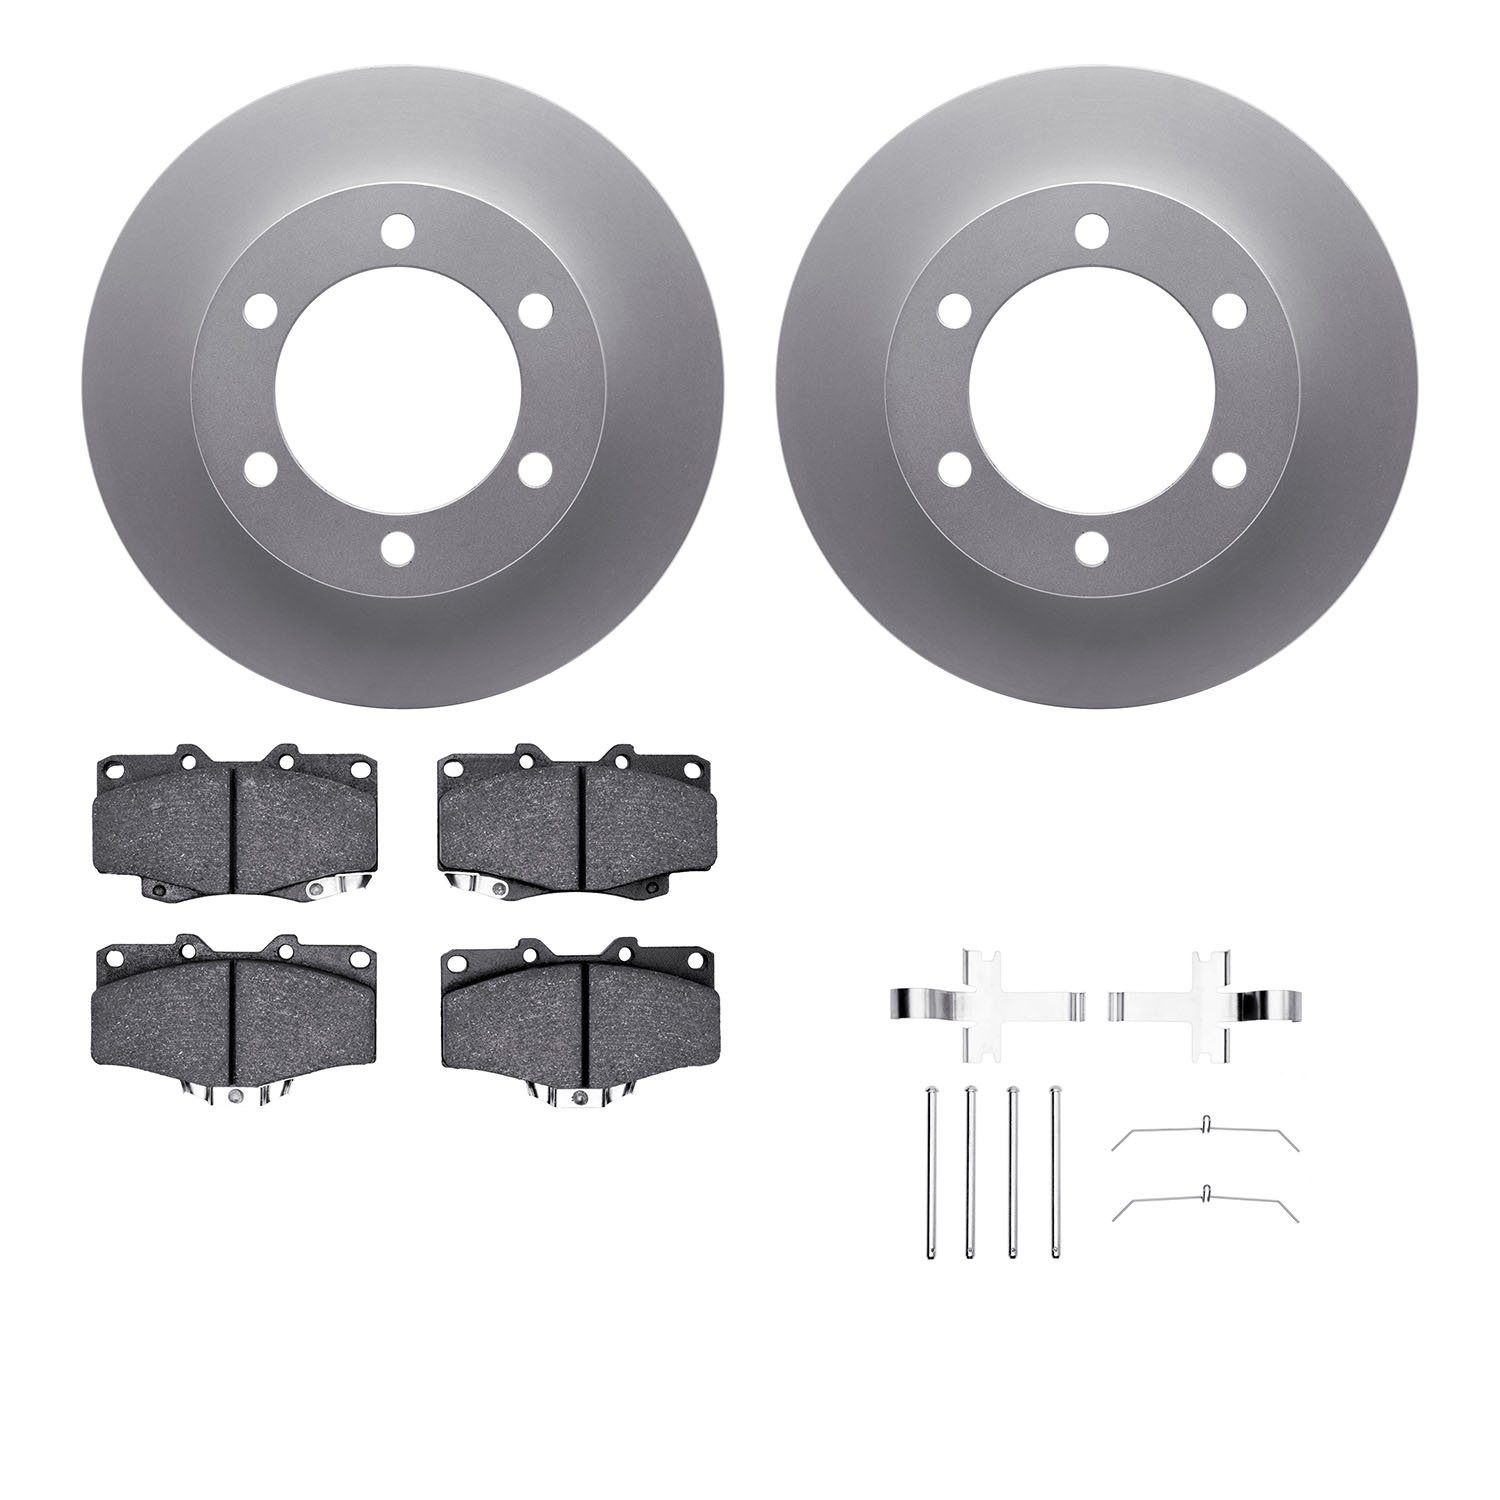 4412-76005 Geospec Brake Rotors with Ultimate-Duty Brake Pads & Hardware, 1995-2004 Lexus/Toyota/Scion, Position: Front